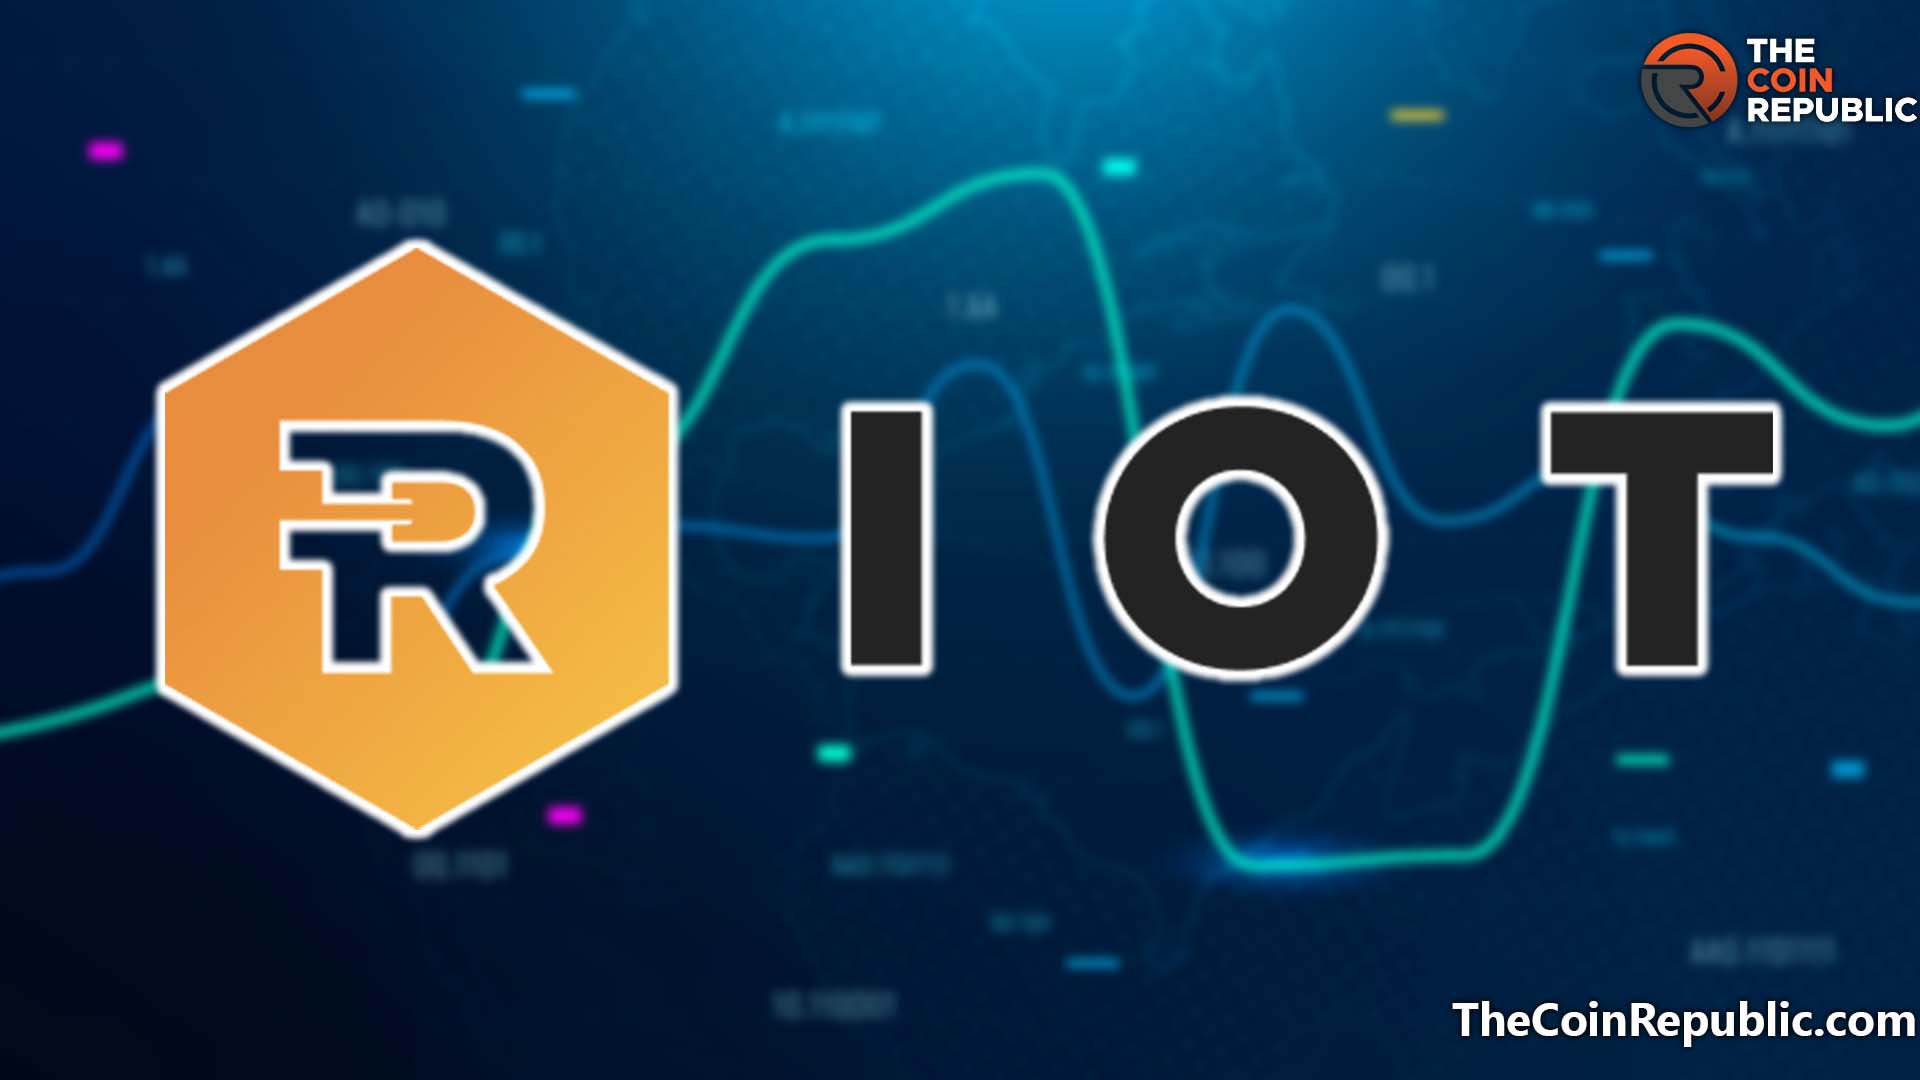 Riot Stock Price Prediction: Will RIOT Stock Avoid this Descending Streak? – Exclusive Technical Analysis!